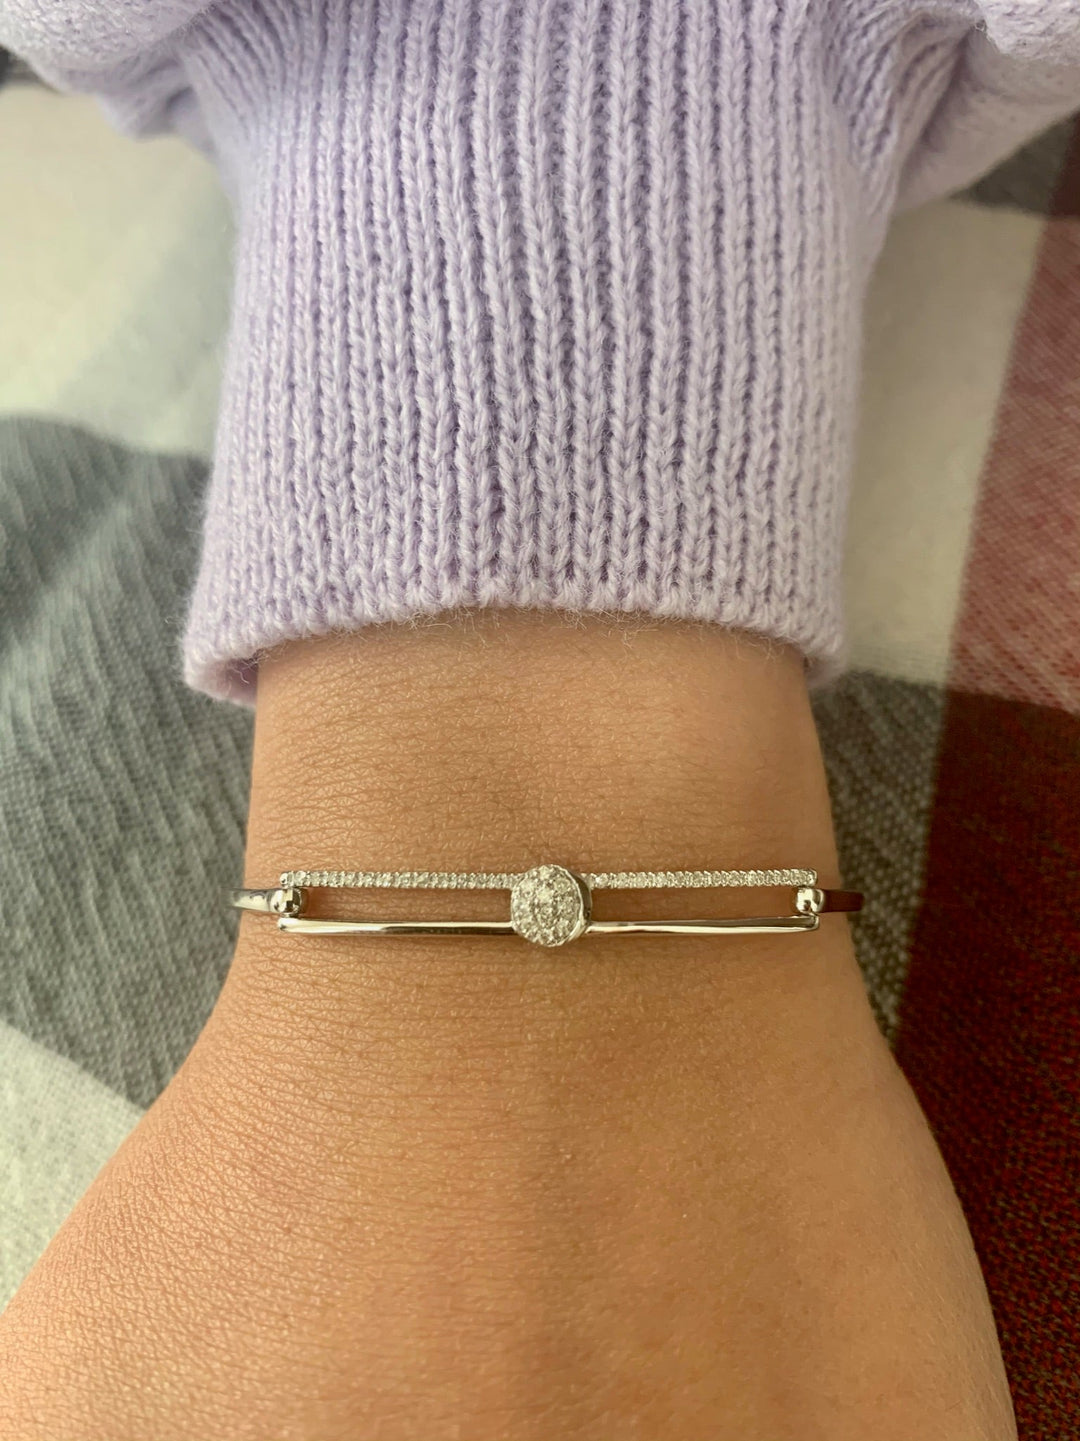 Moonlit Phases Diamond Bangle in Sterling Silver